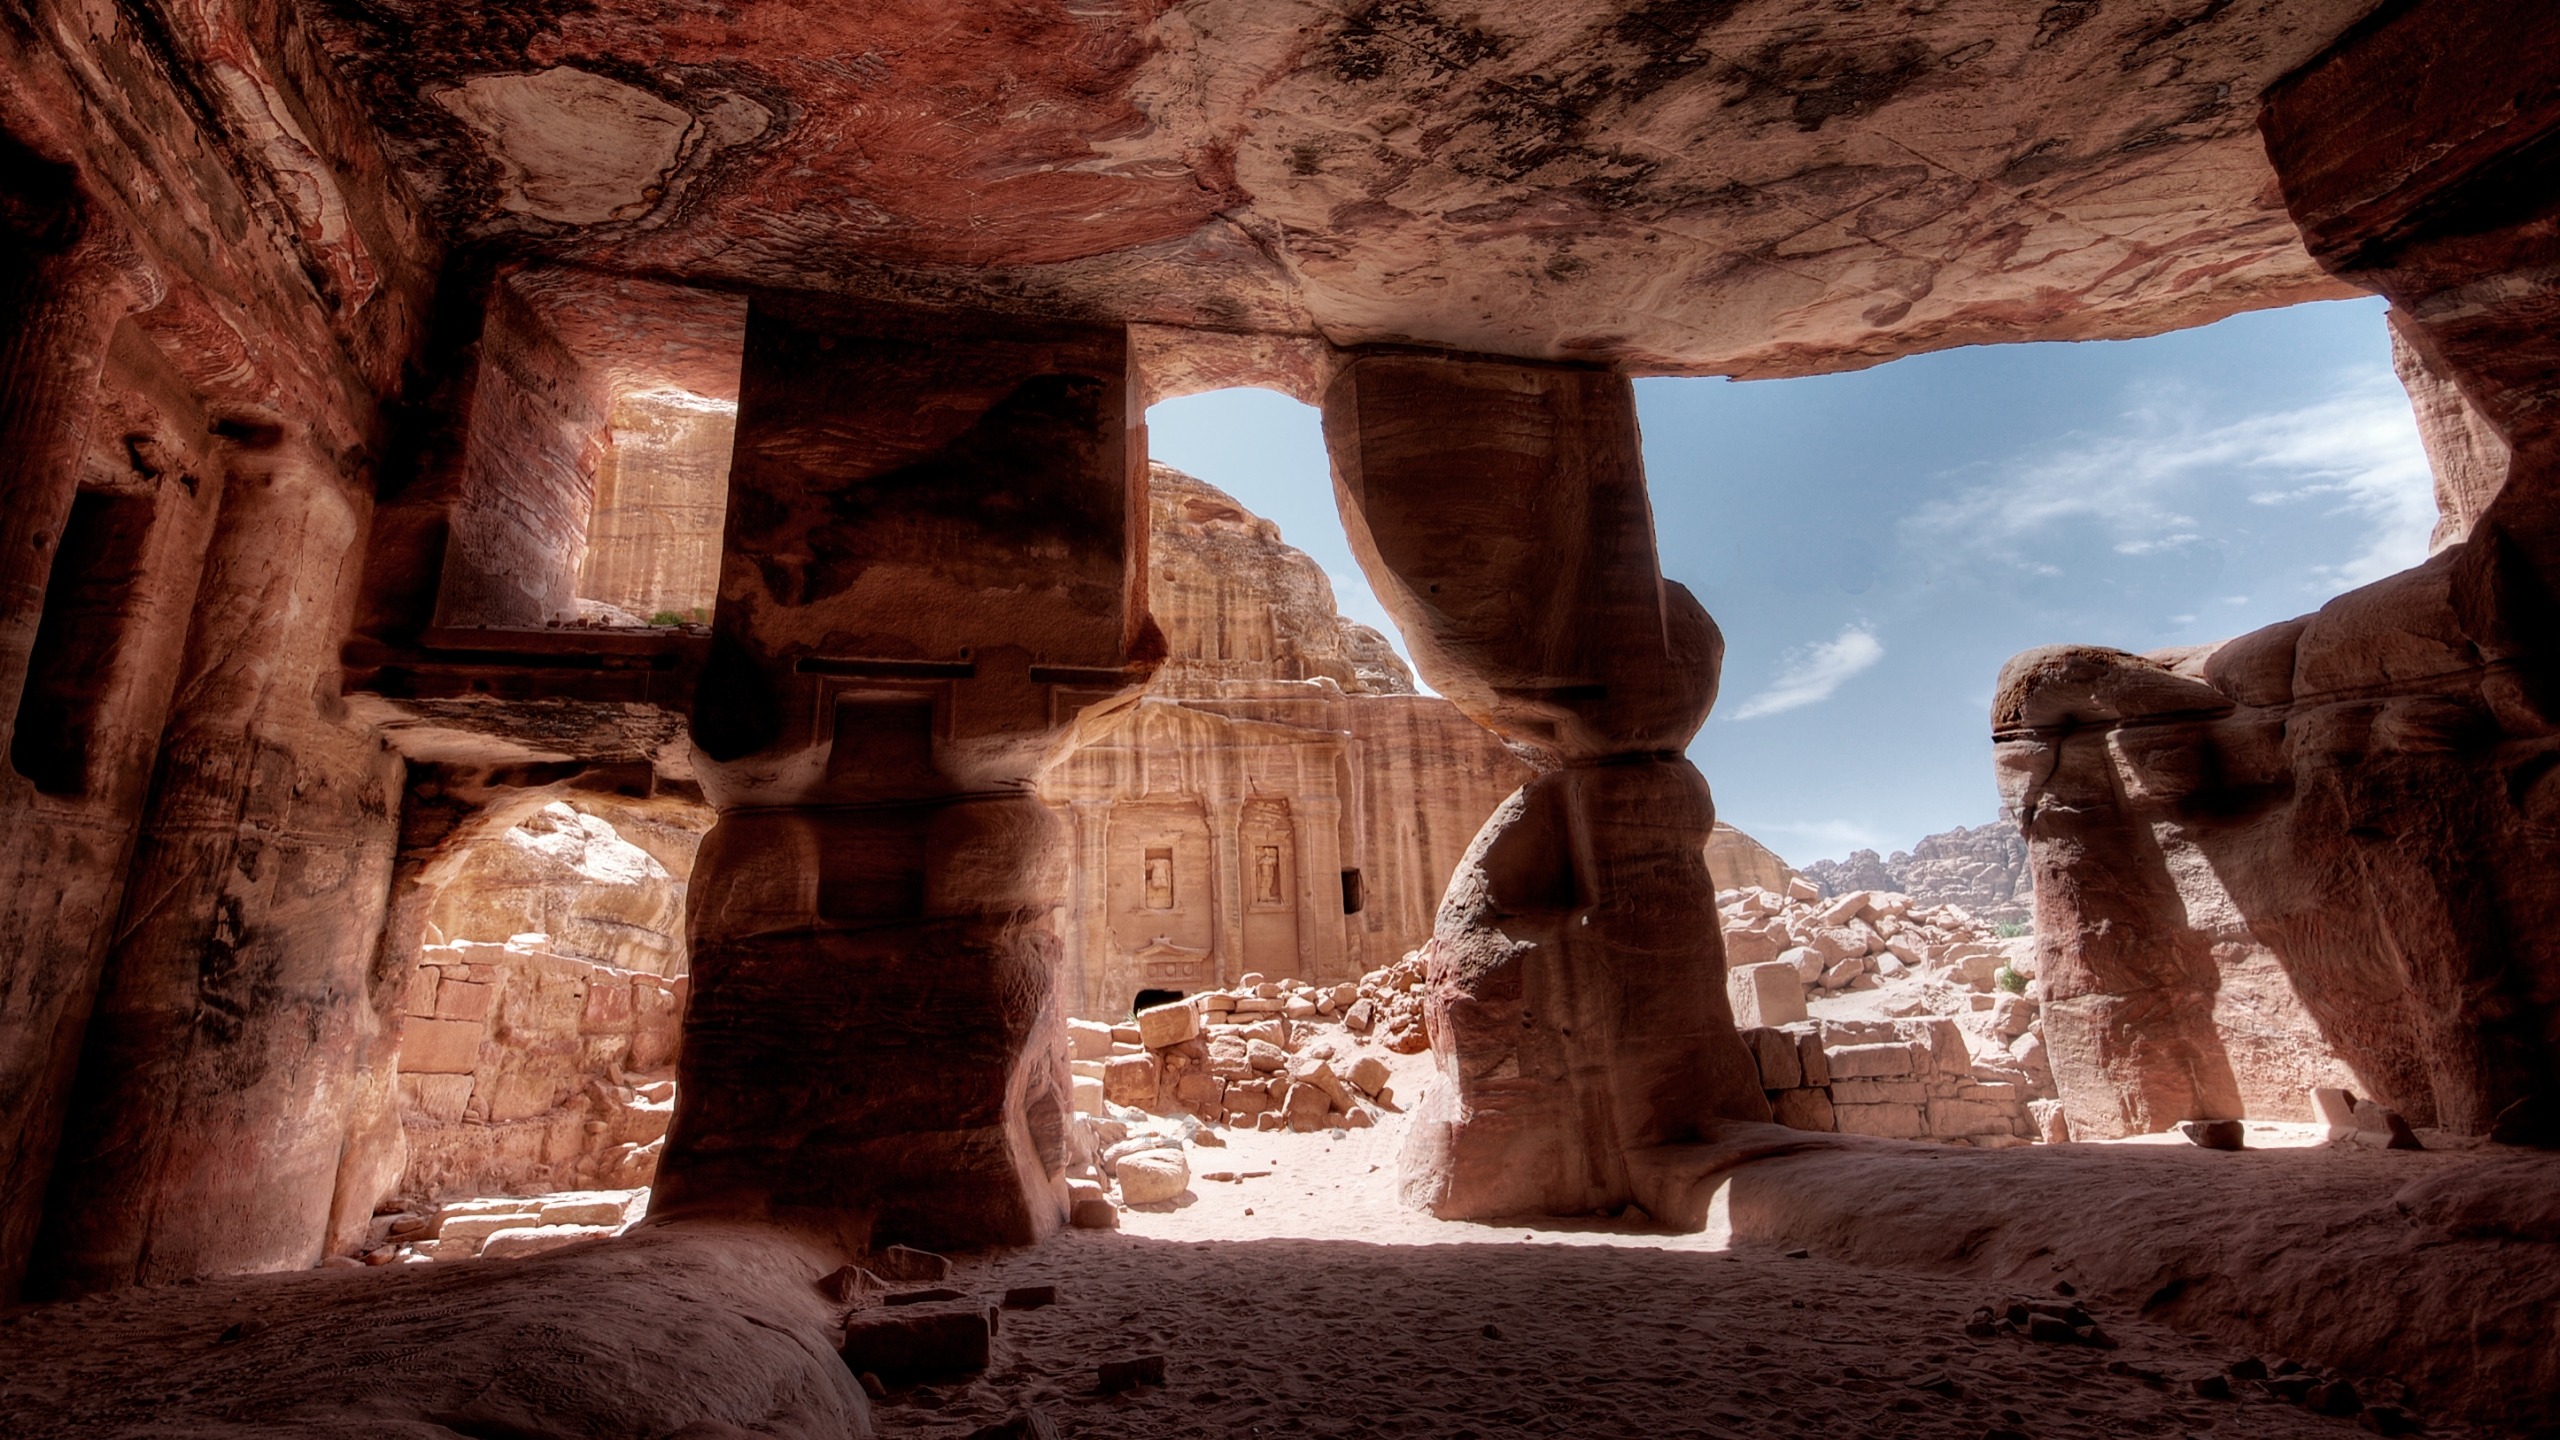 HD wallpaper Petra Archaeological Site In The Desert Of Jordan About 300  Bc The Capital Of The Nabat Kingdom A Lavi  City of petra Hd wallpaper  World wallpaper